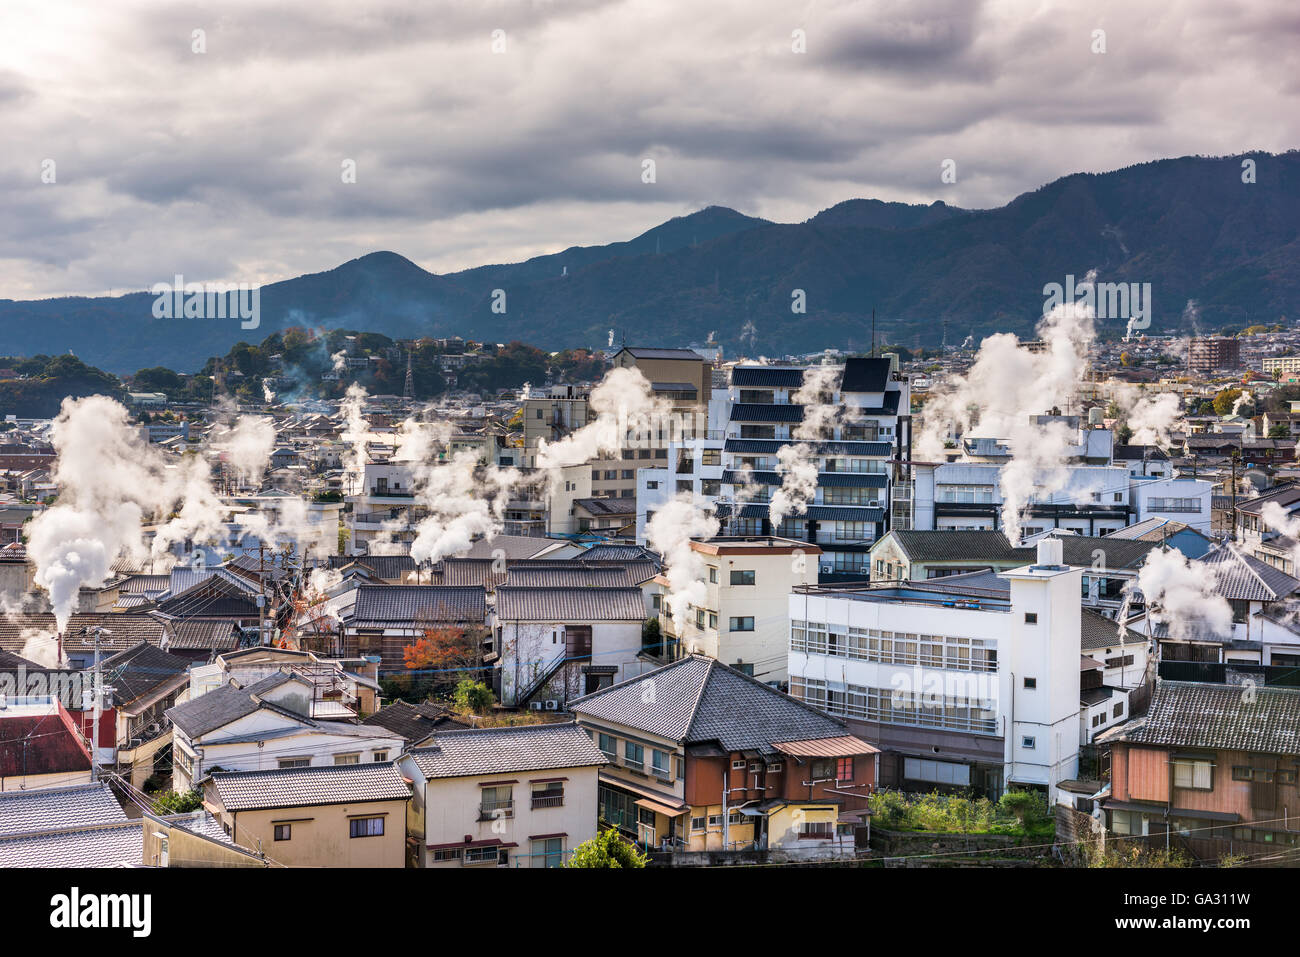 Beppu, Japan cityscape with hot spring bath houses. Stock Photo